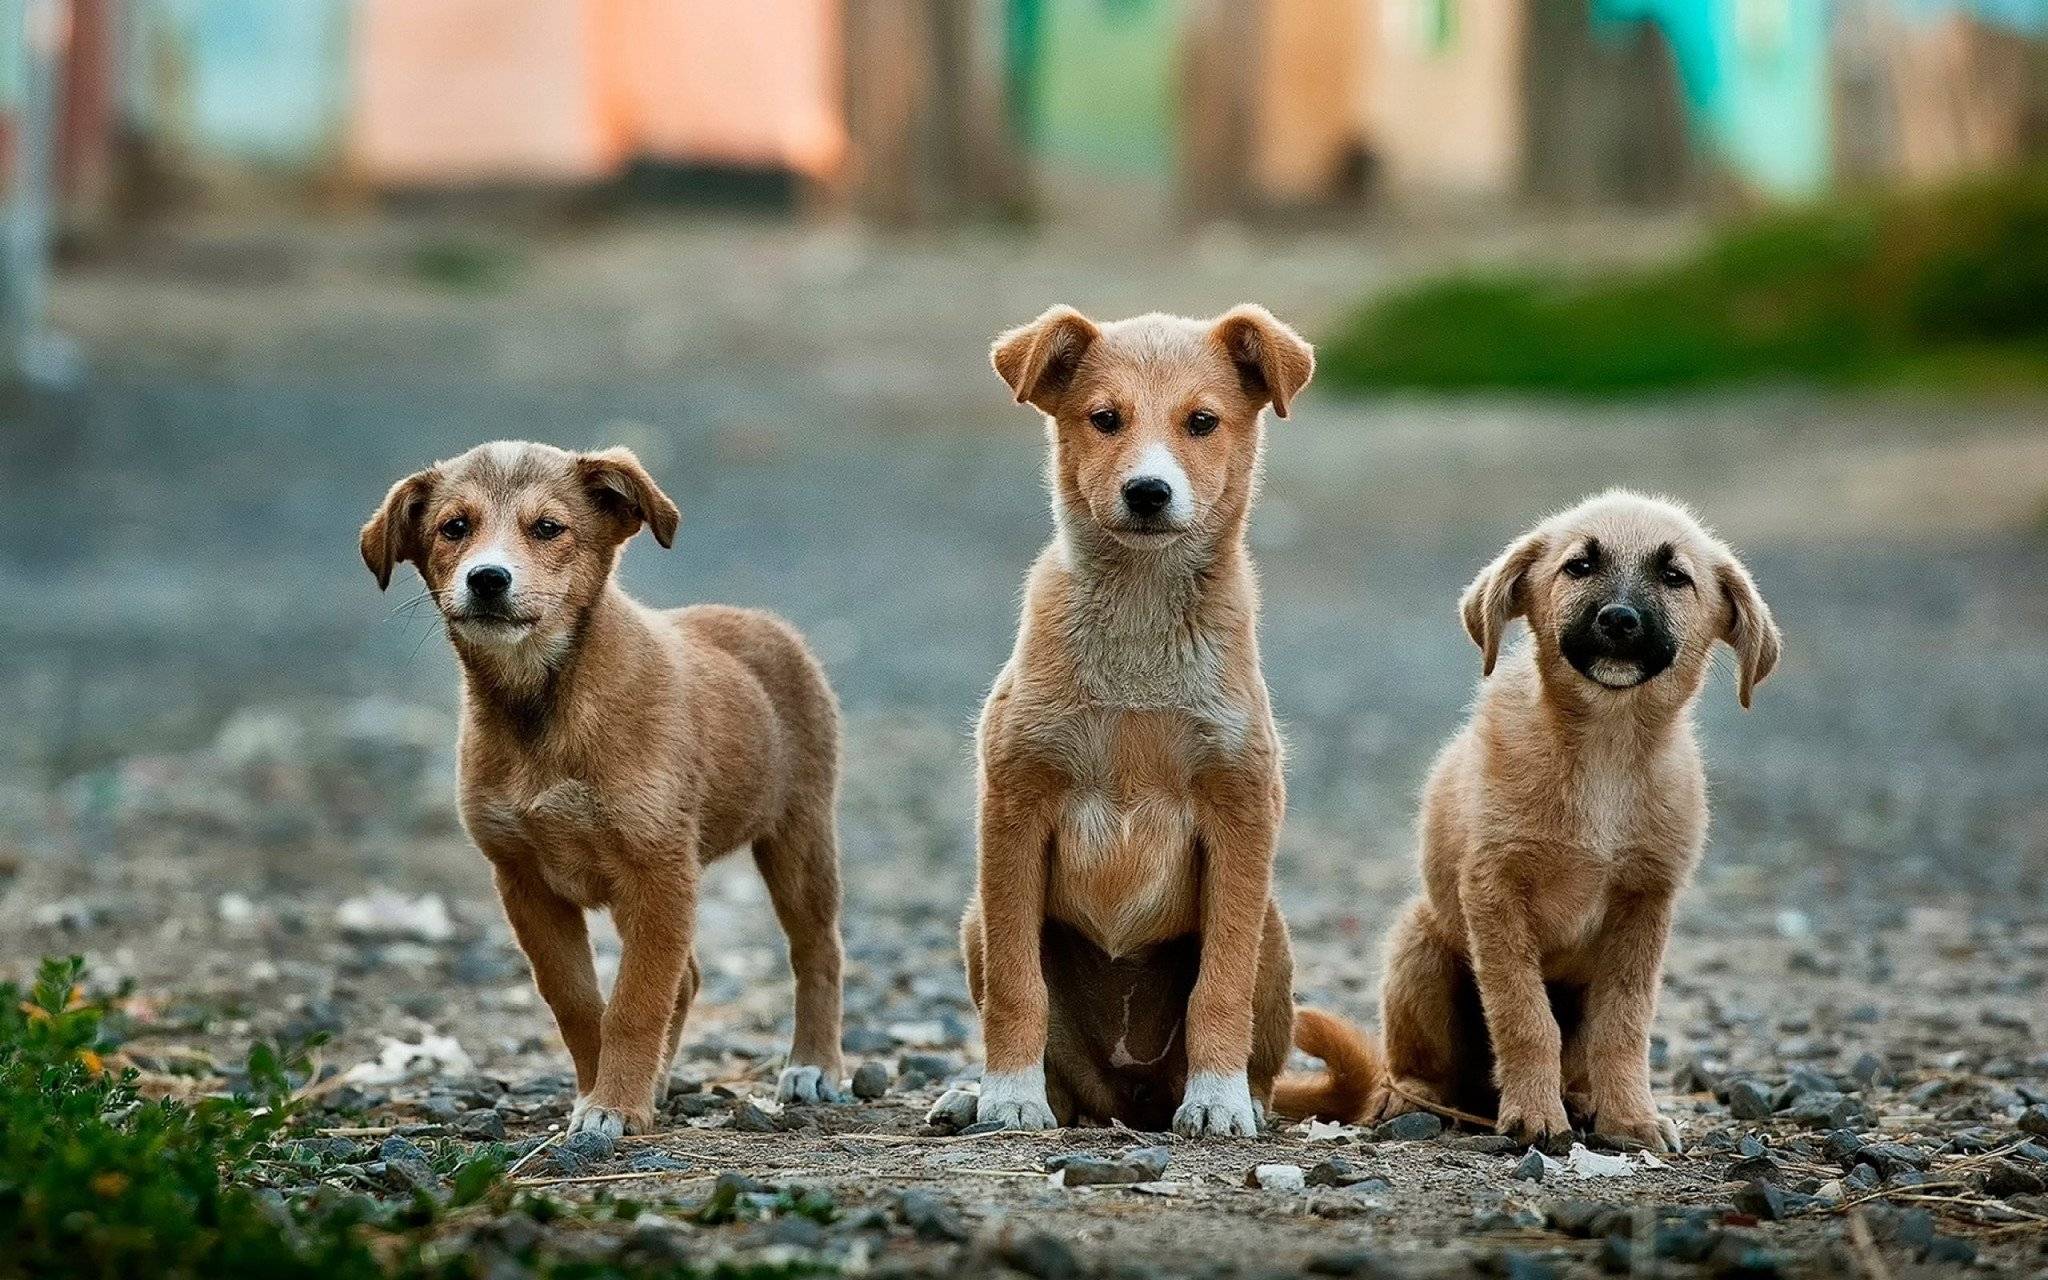 Stray puppies without their mom may be missing key bacteria for a healthy gut